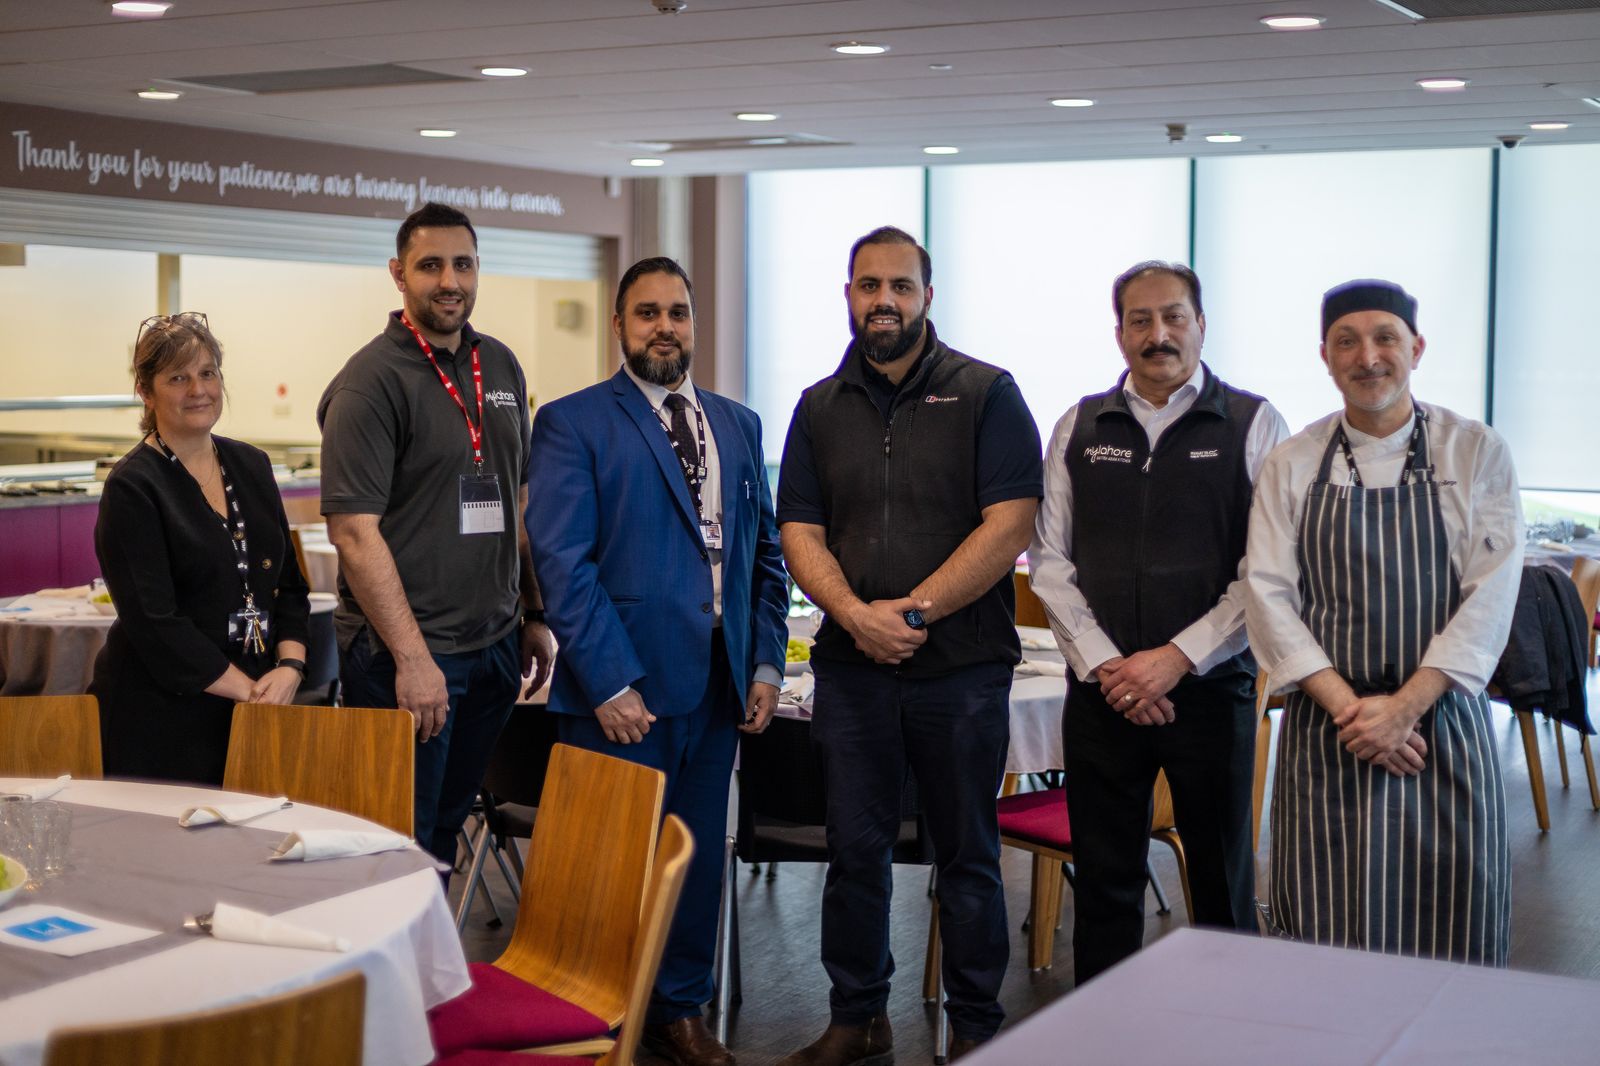 New Bradford College chef academy launched with MyLahore Restaurants